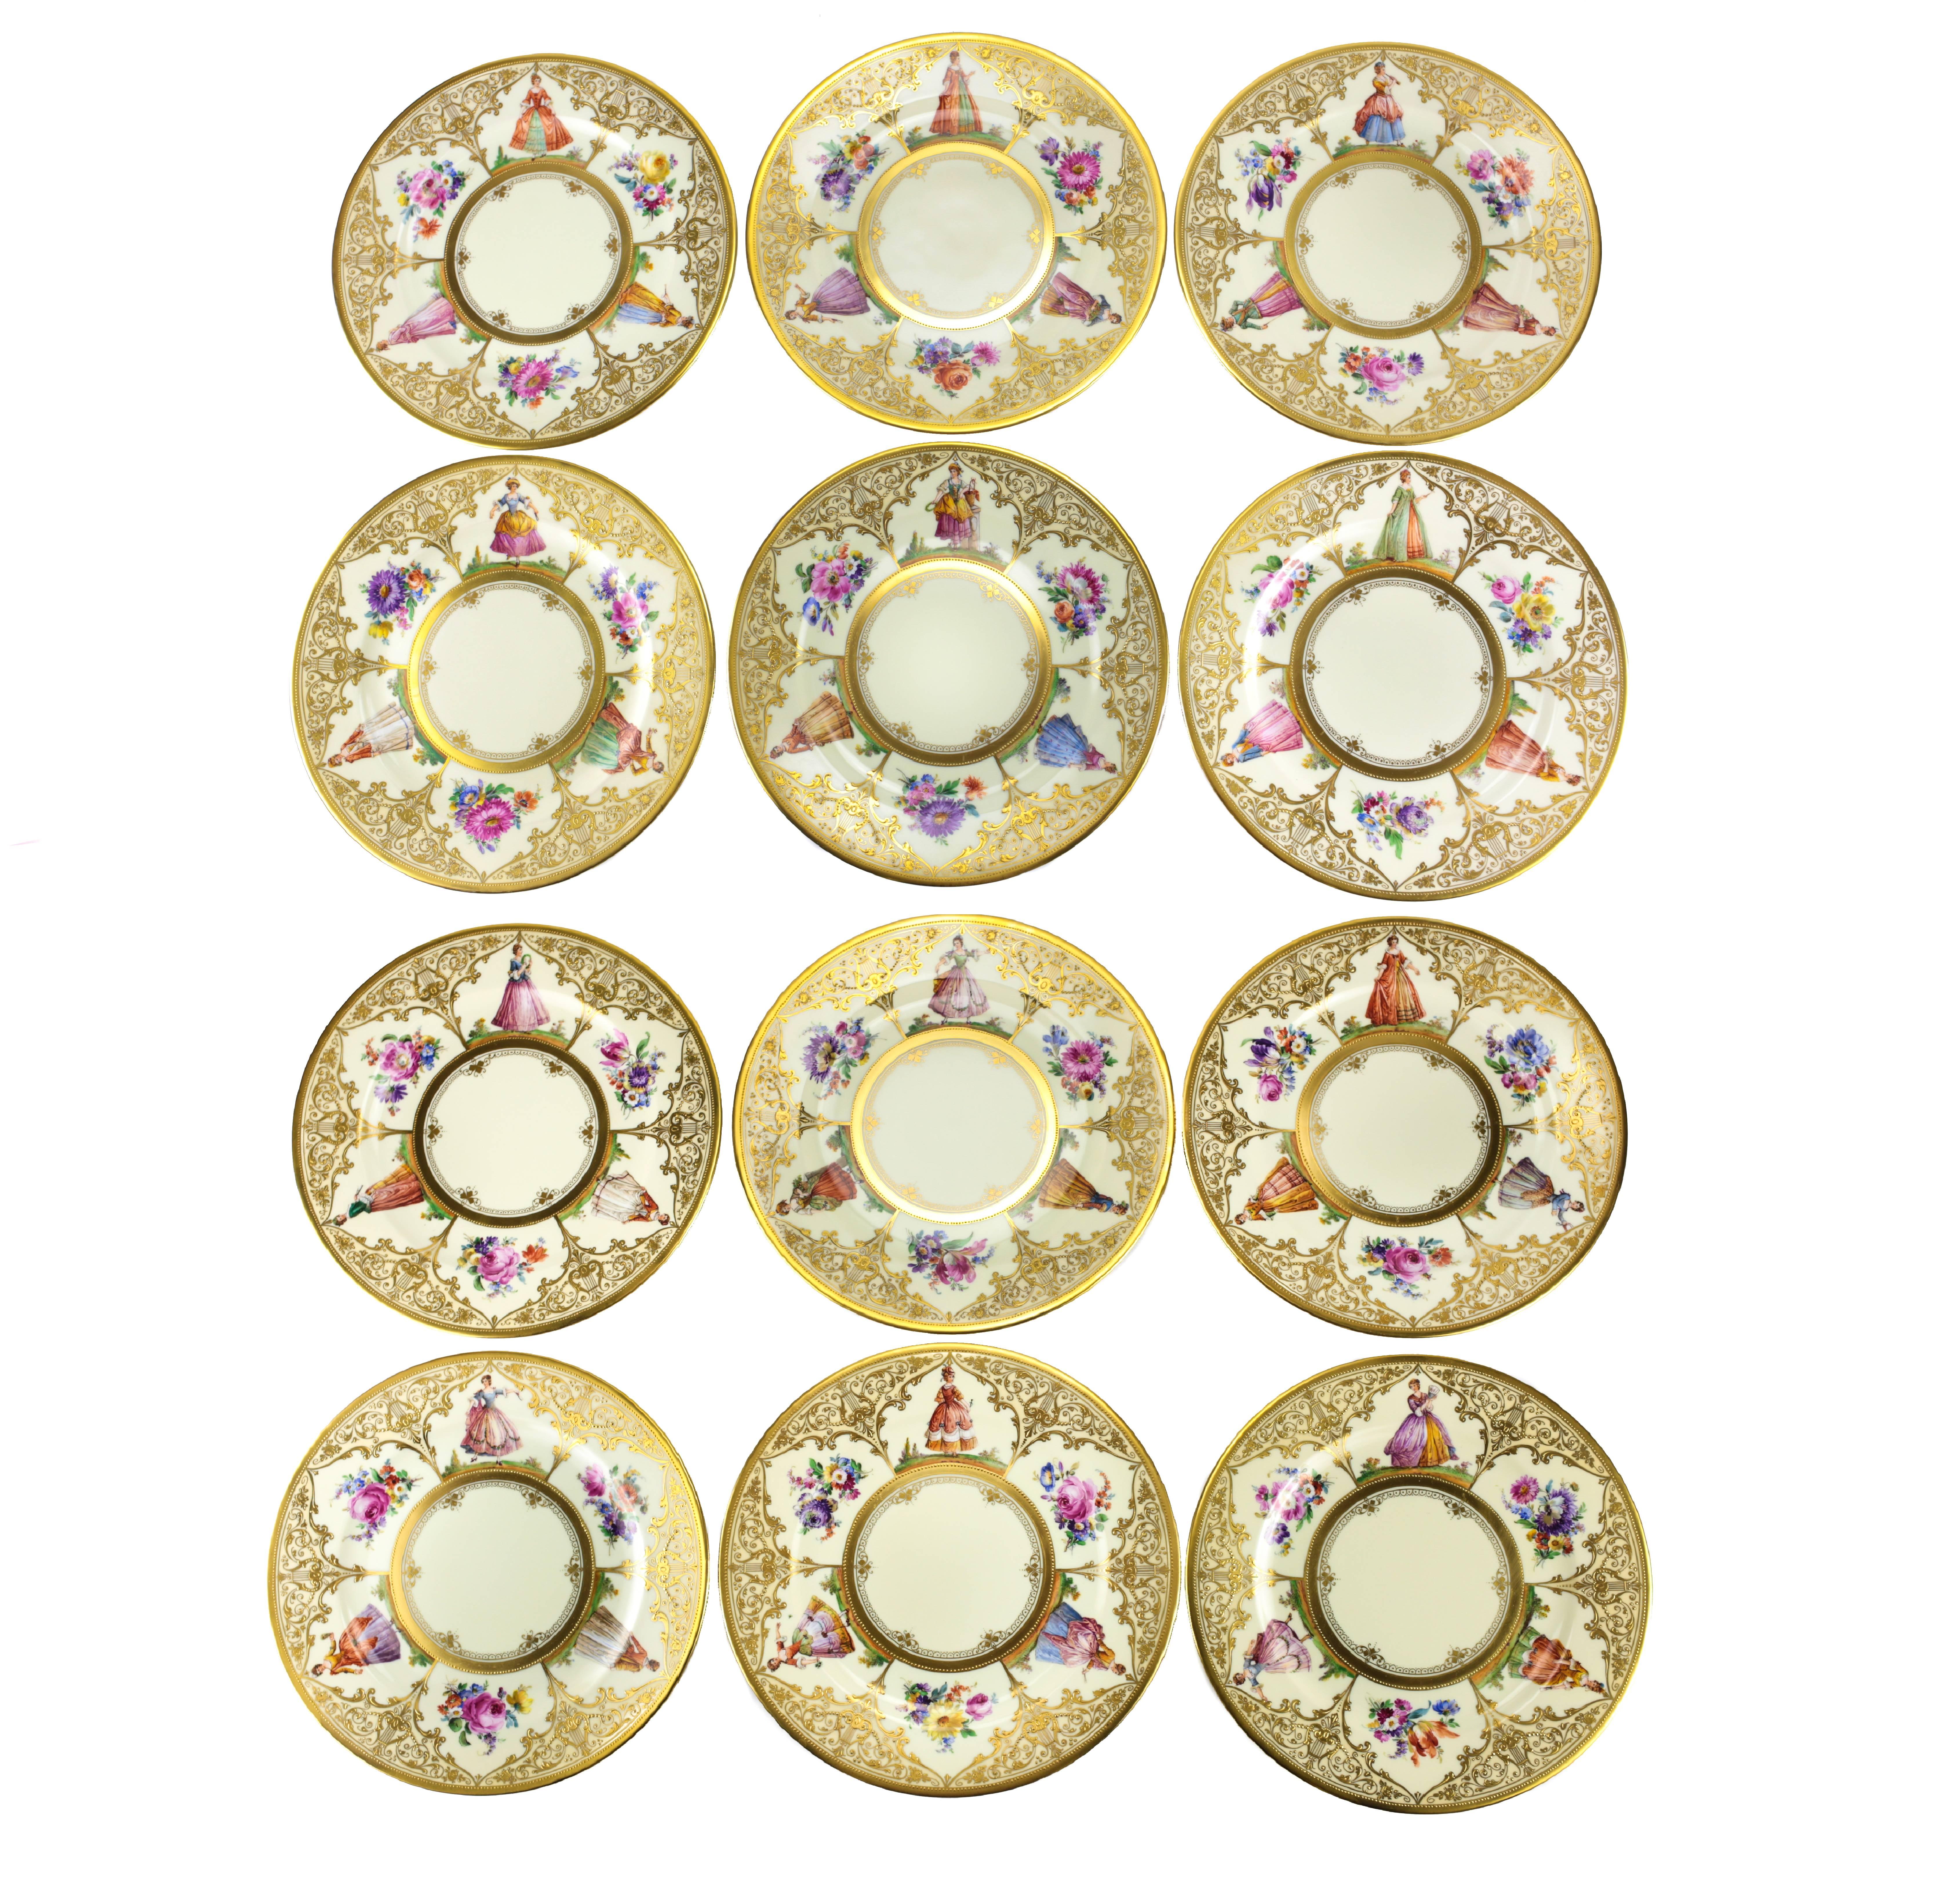 12 Dresden Hand-Painted Dinner Plates by Abrosius Lamm